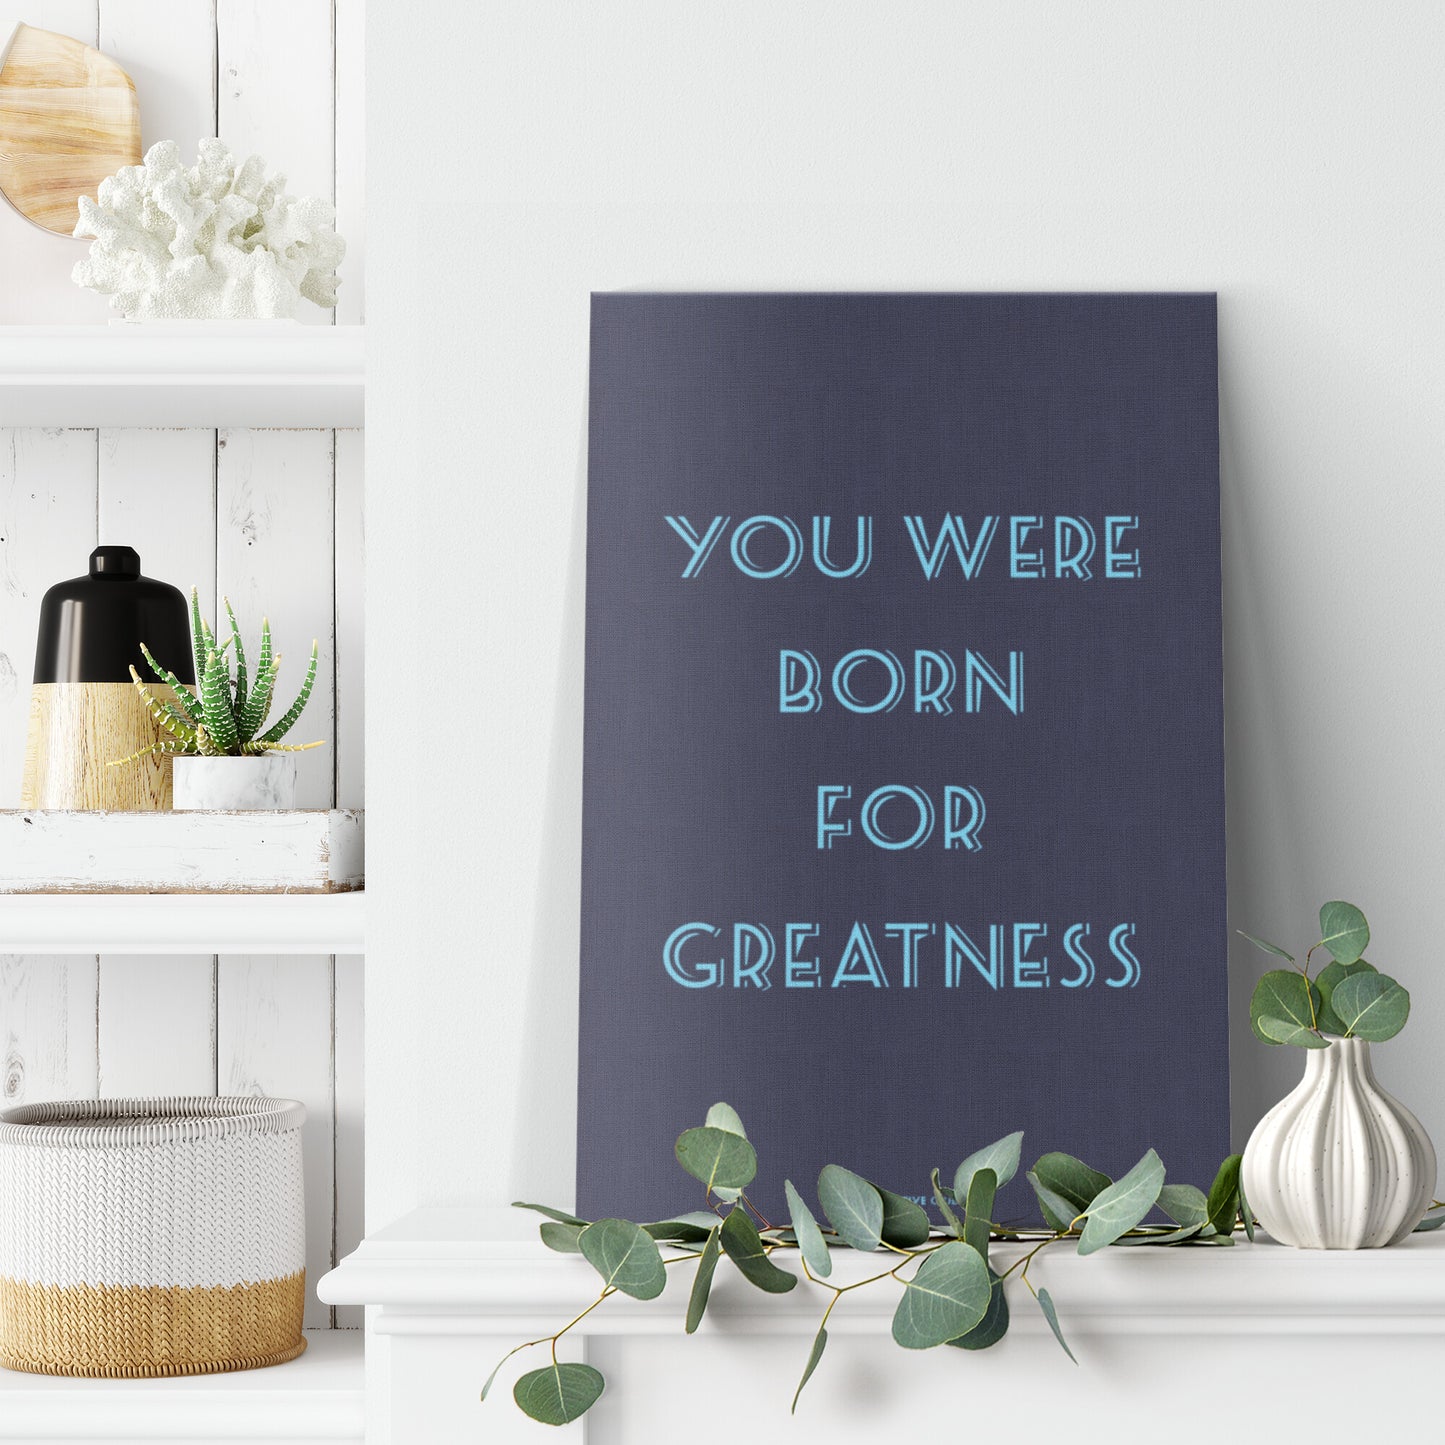 YOU WERE BORN FOR GREATNESS